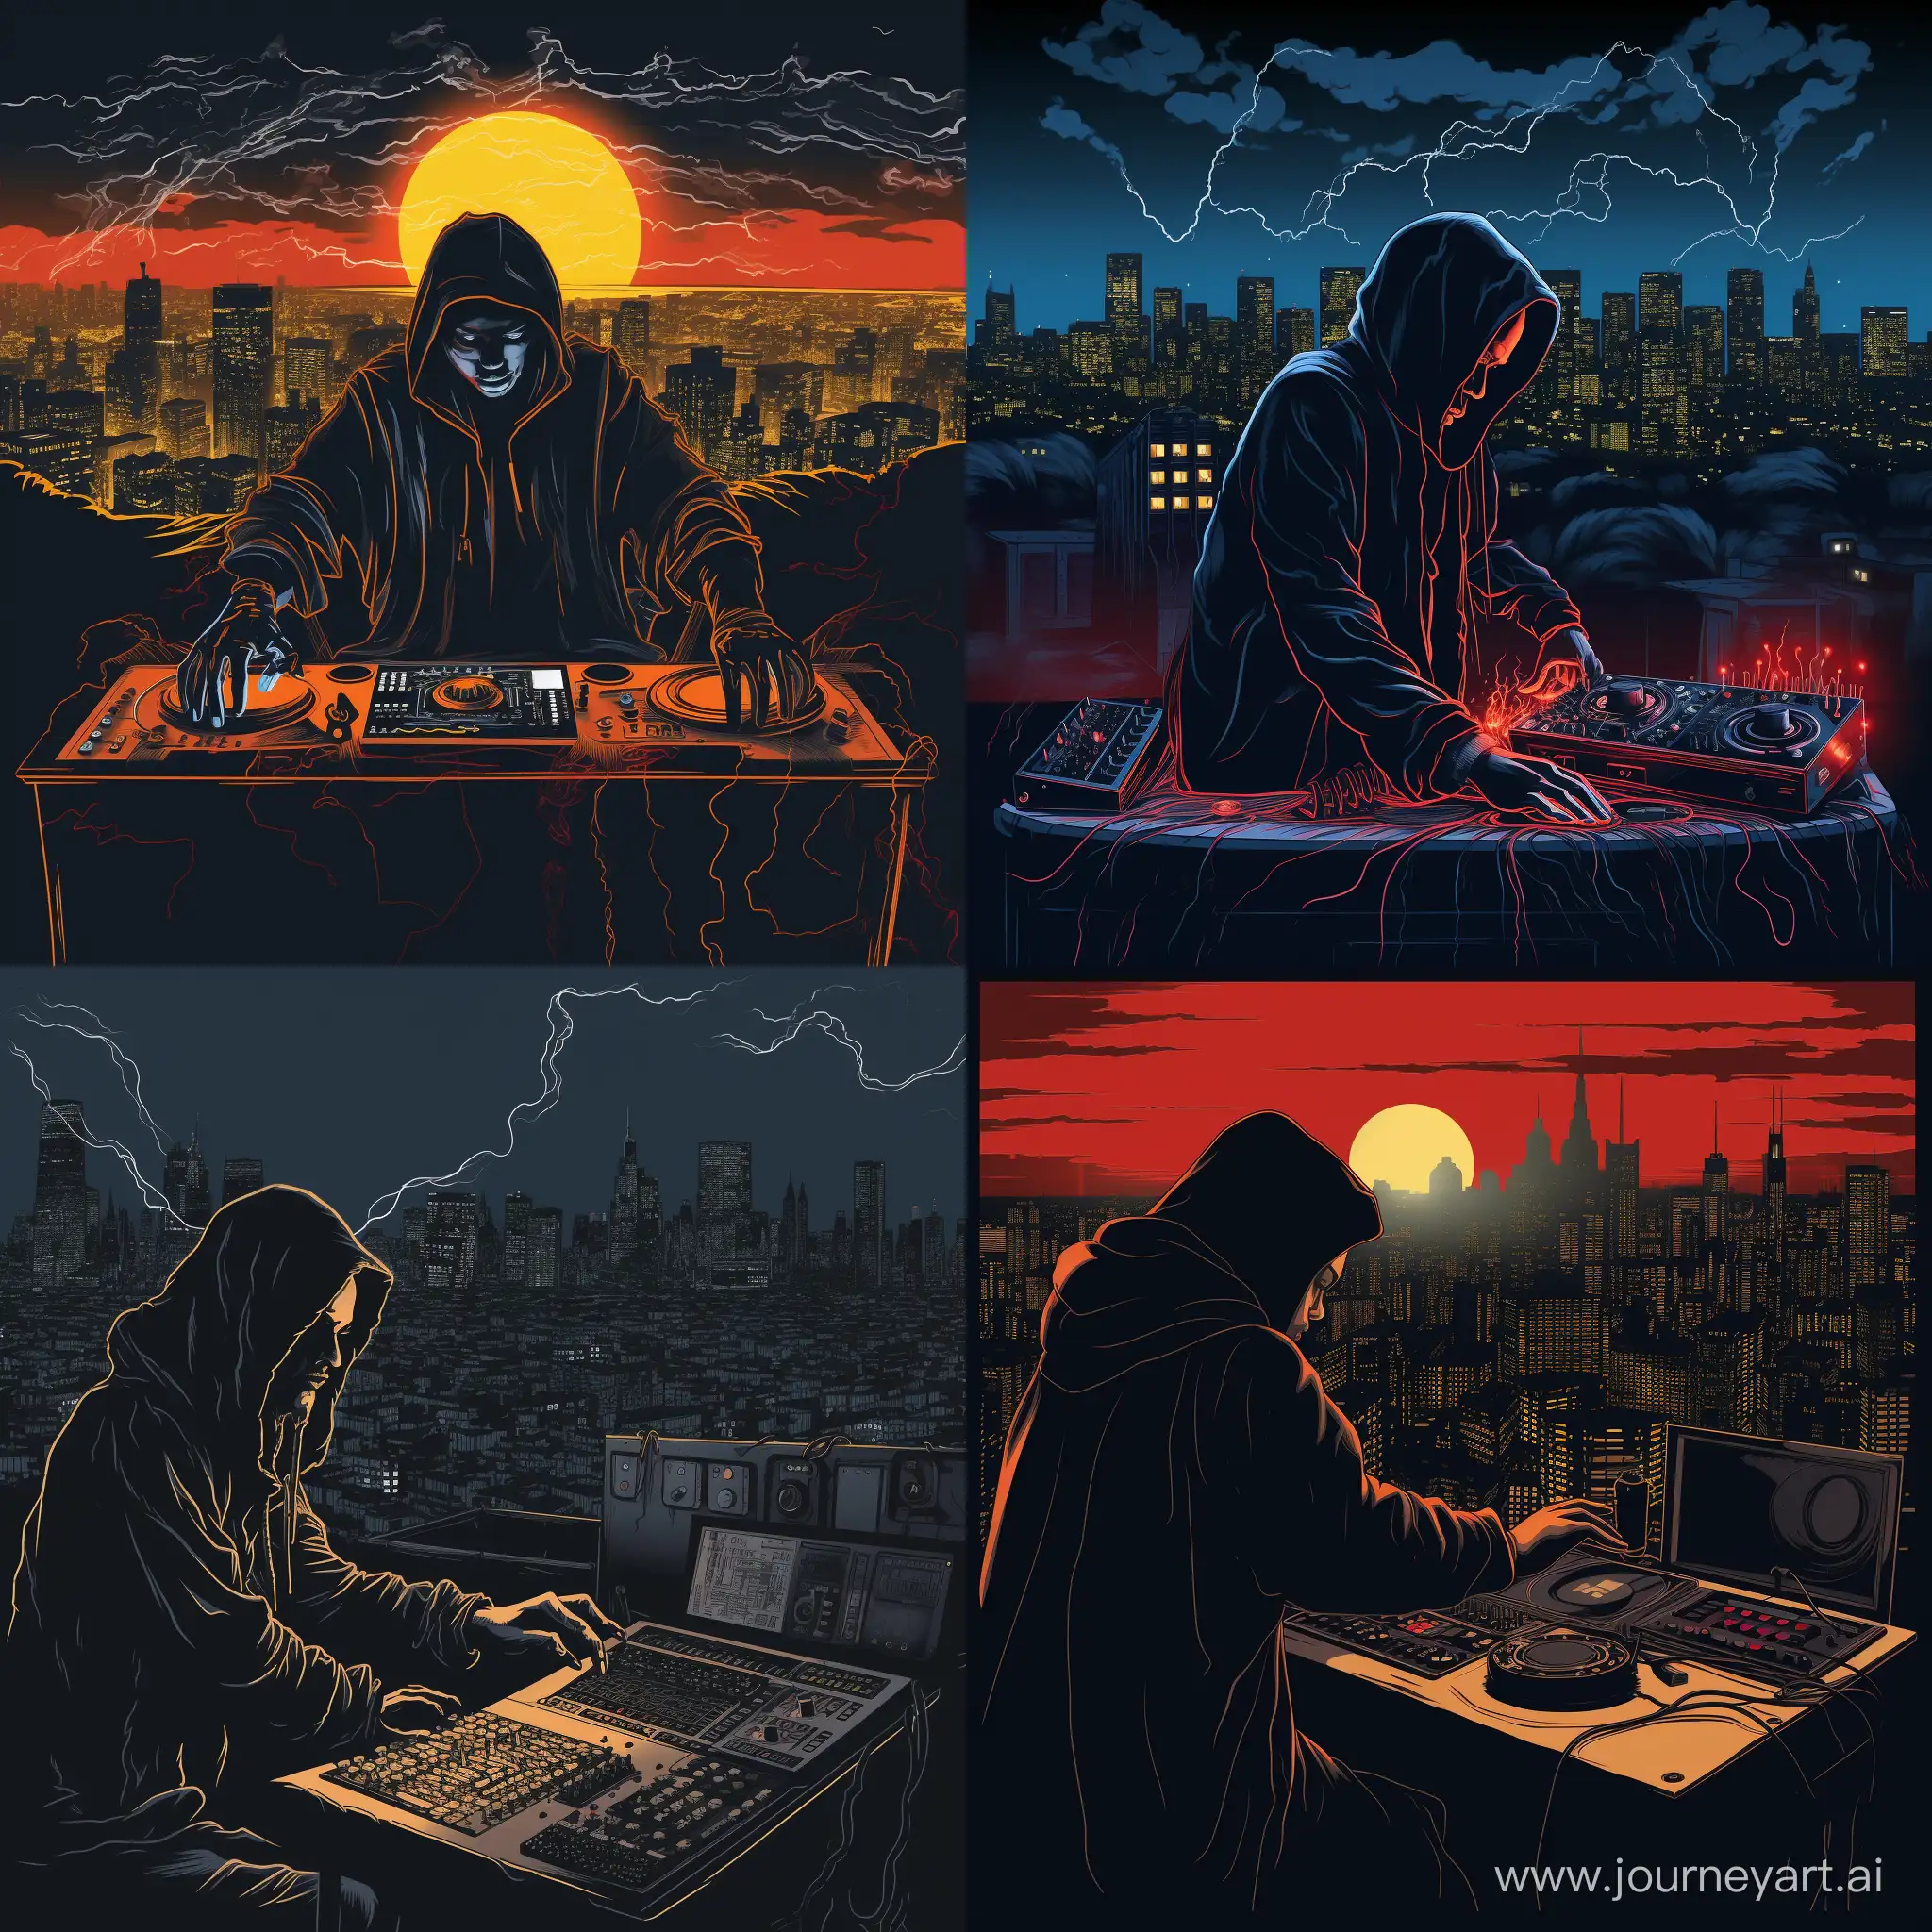 Urban-DJ-in-Grime-Fiends-Style-Cityscape-with-Black-Magic-Robed-DJ-at-Console